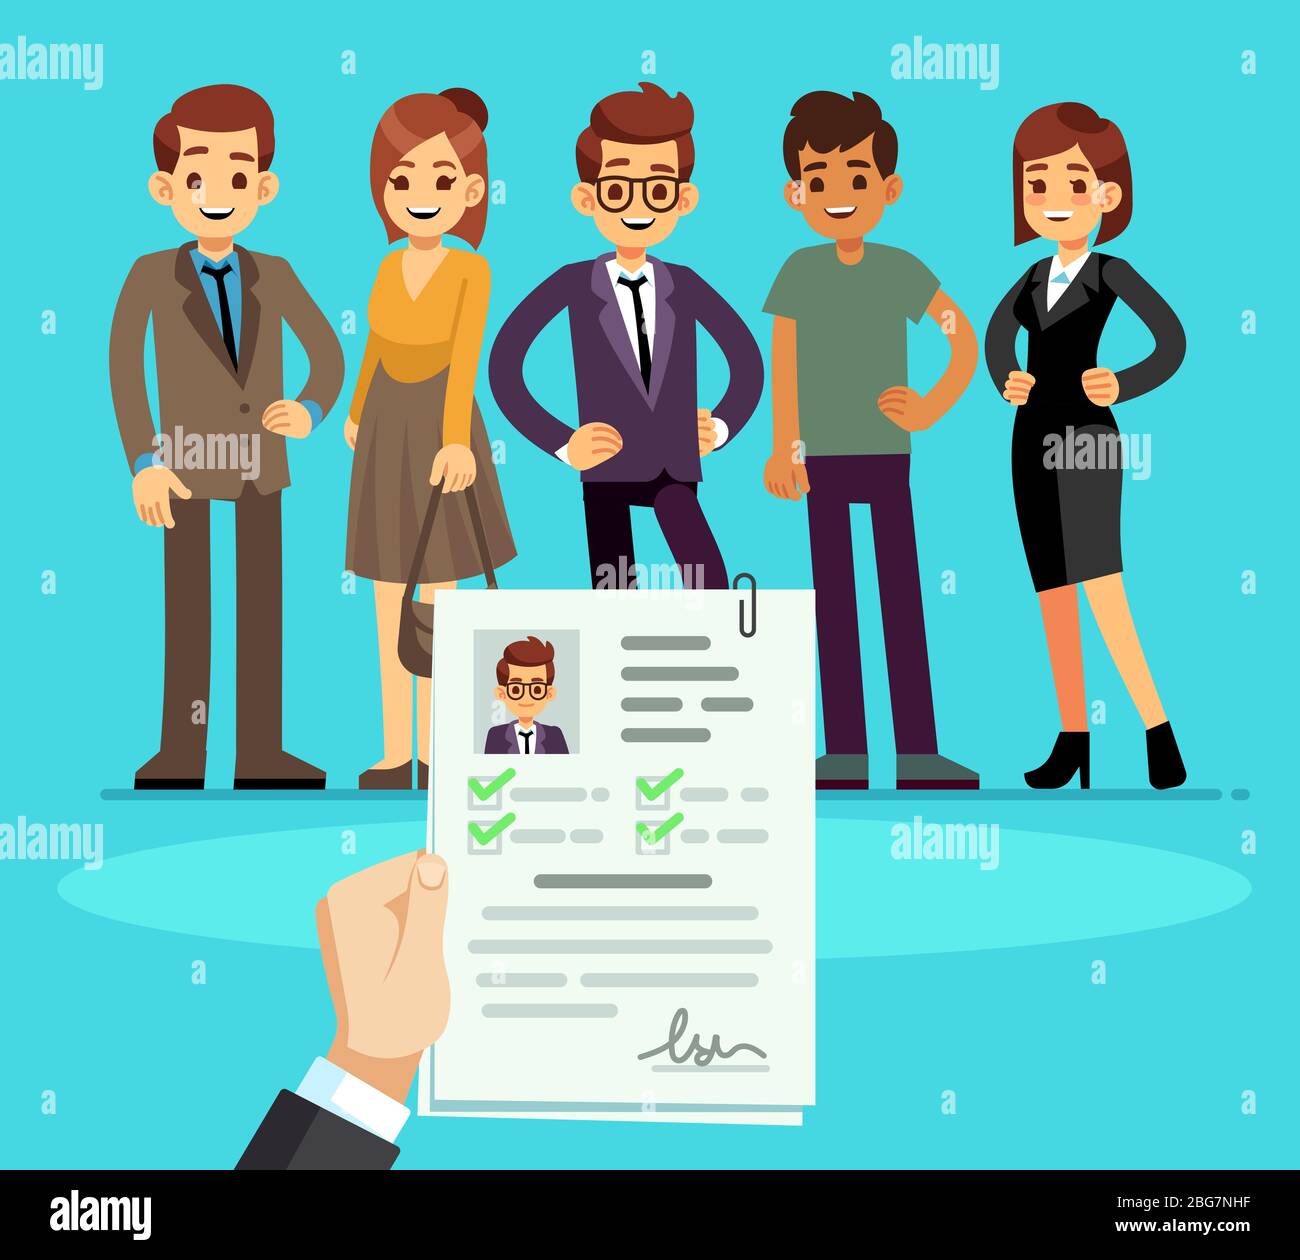 Recruitment. Recruiter choosing candidates with cv resume. Human resource and job interview vector concept. Illustration of human candidate, hiring resource Stock Vector